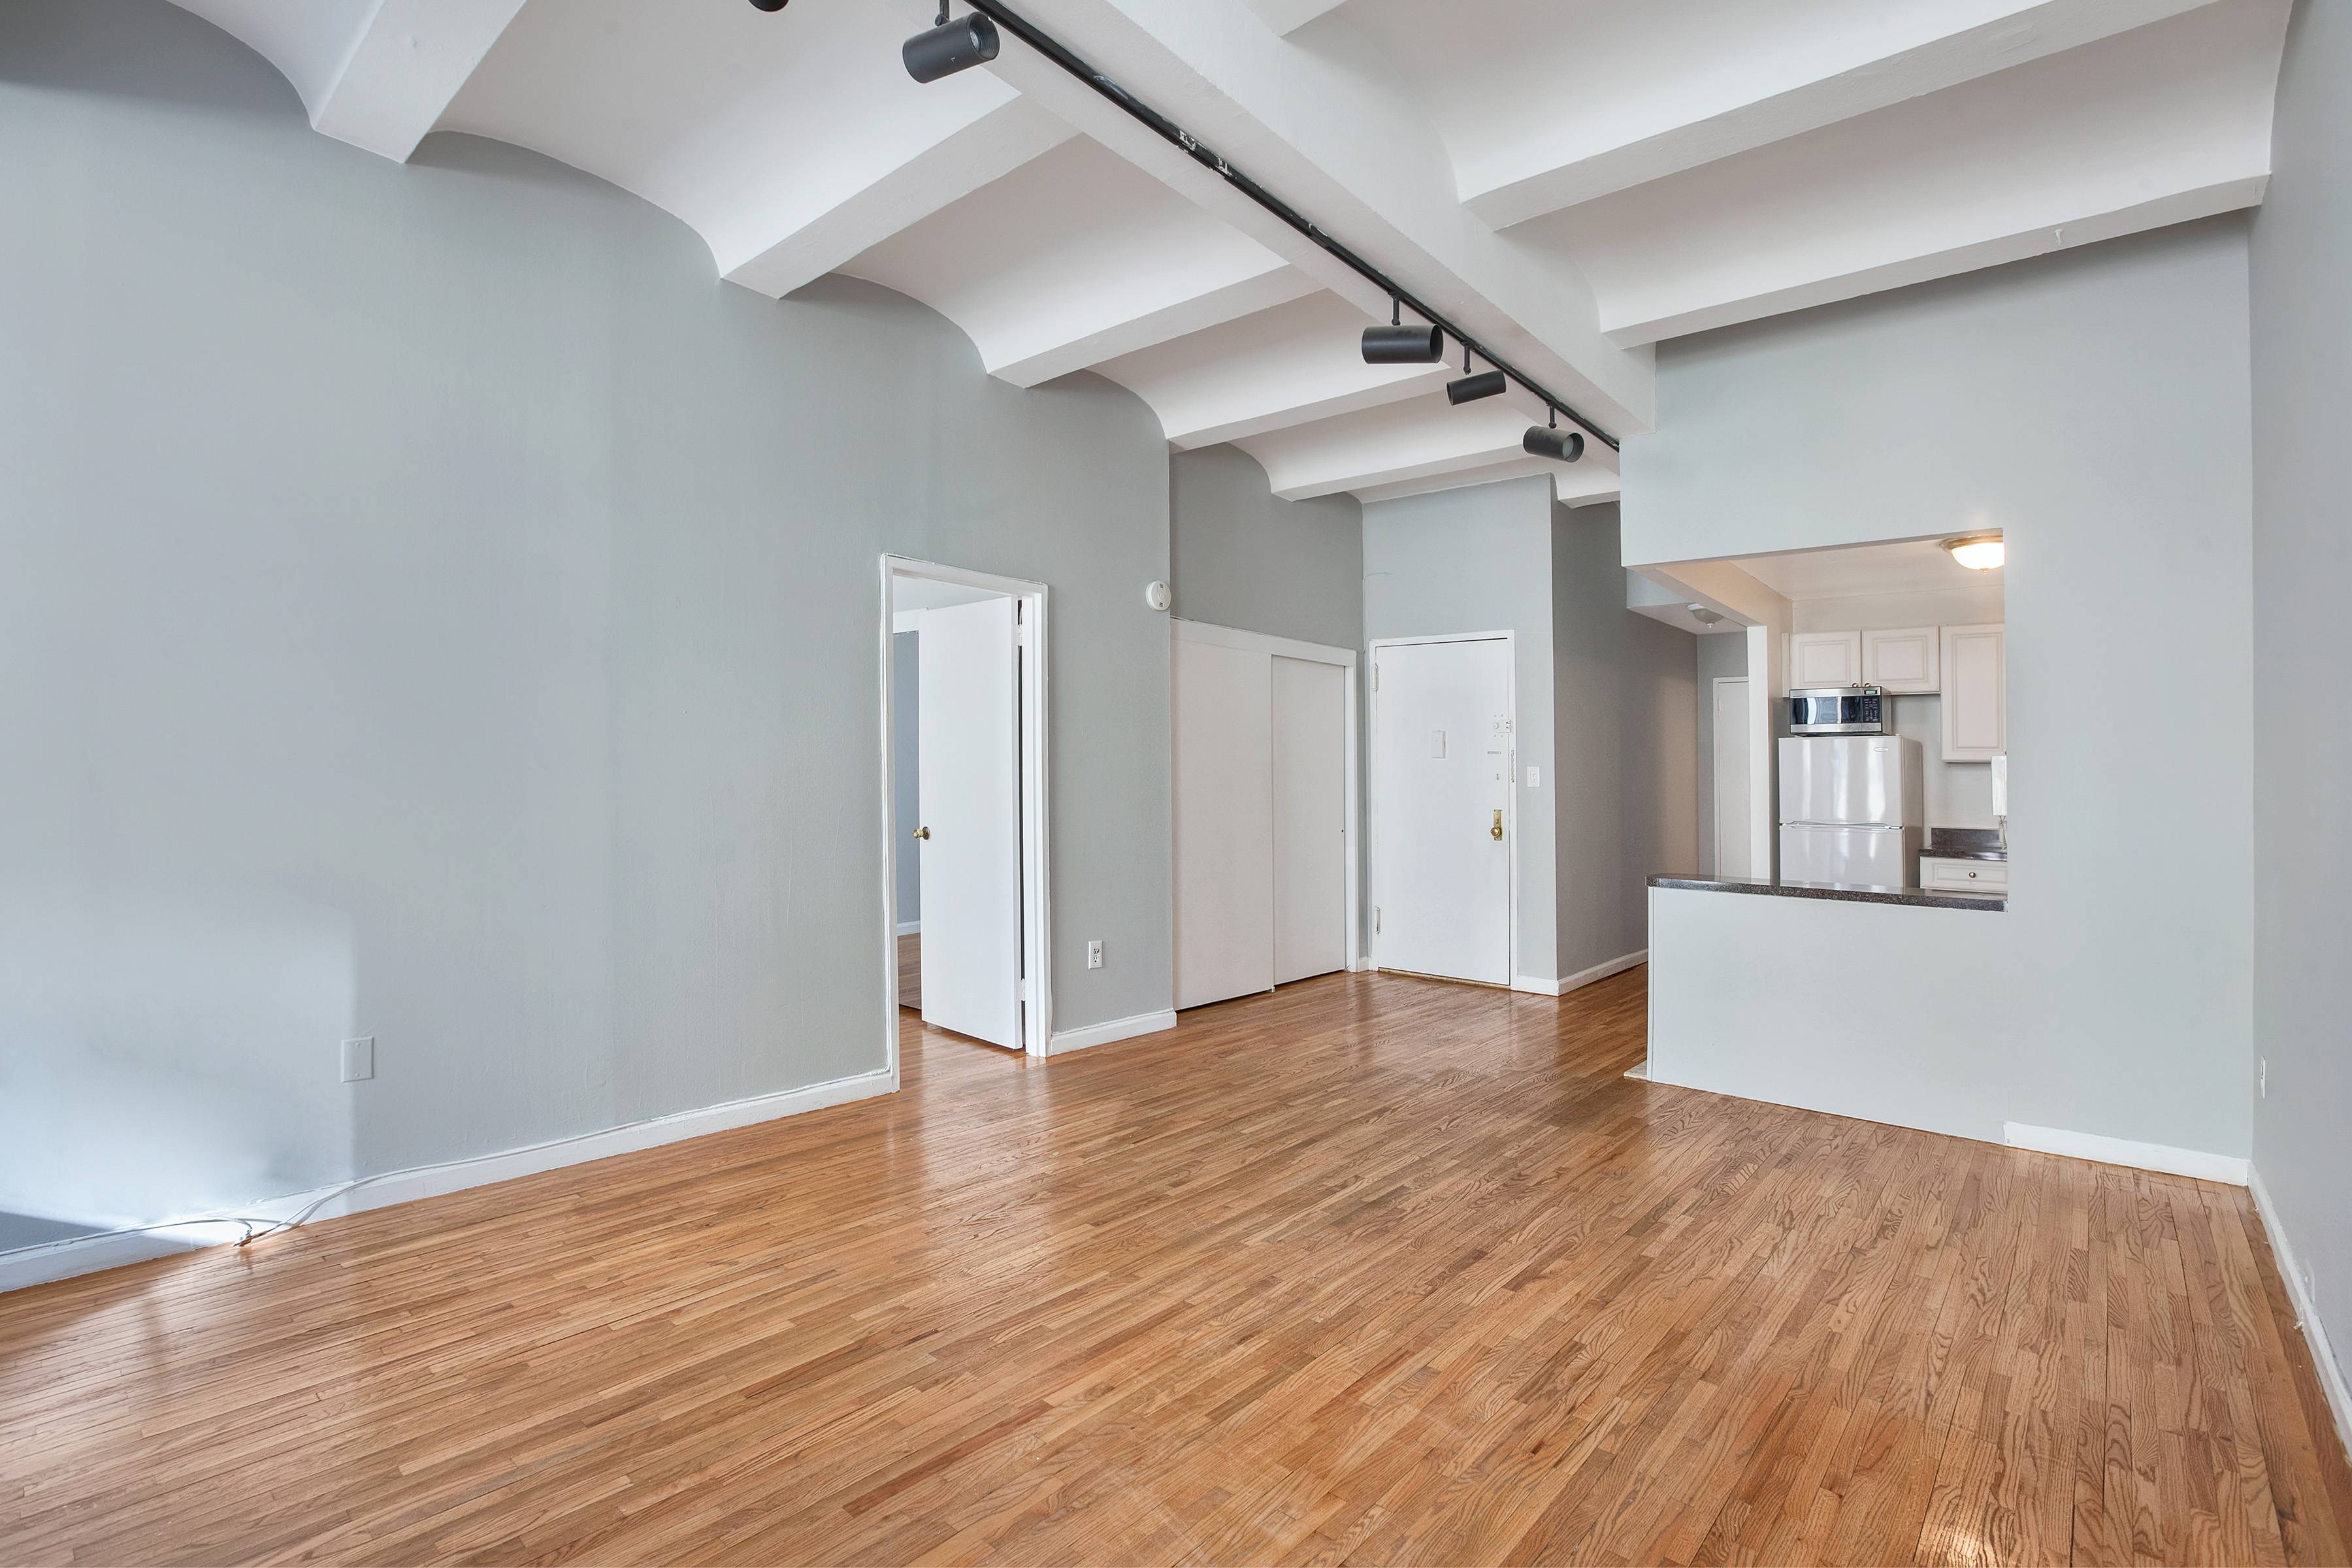 Flatiron King Sized 1BR Sun-Drenched with High Ceilings Oversized Windows Original Hardwood Floors 1 Block From Union Square